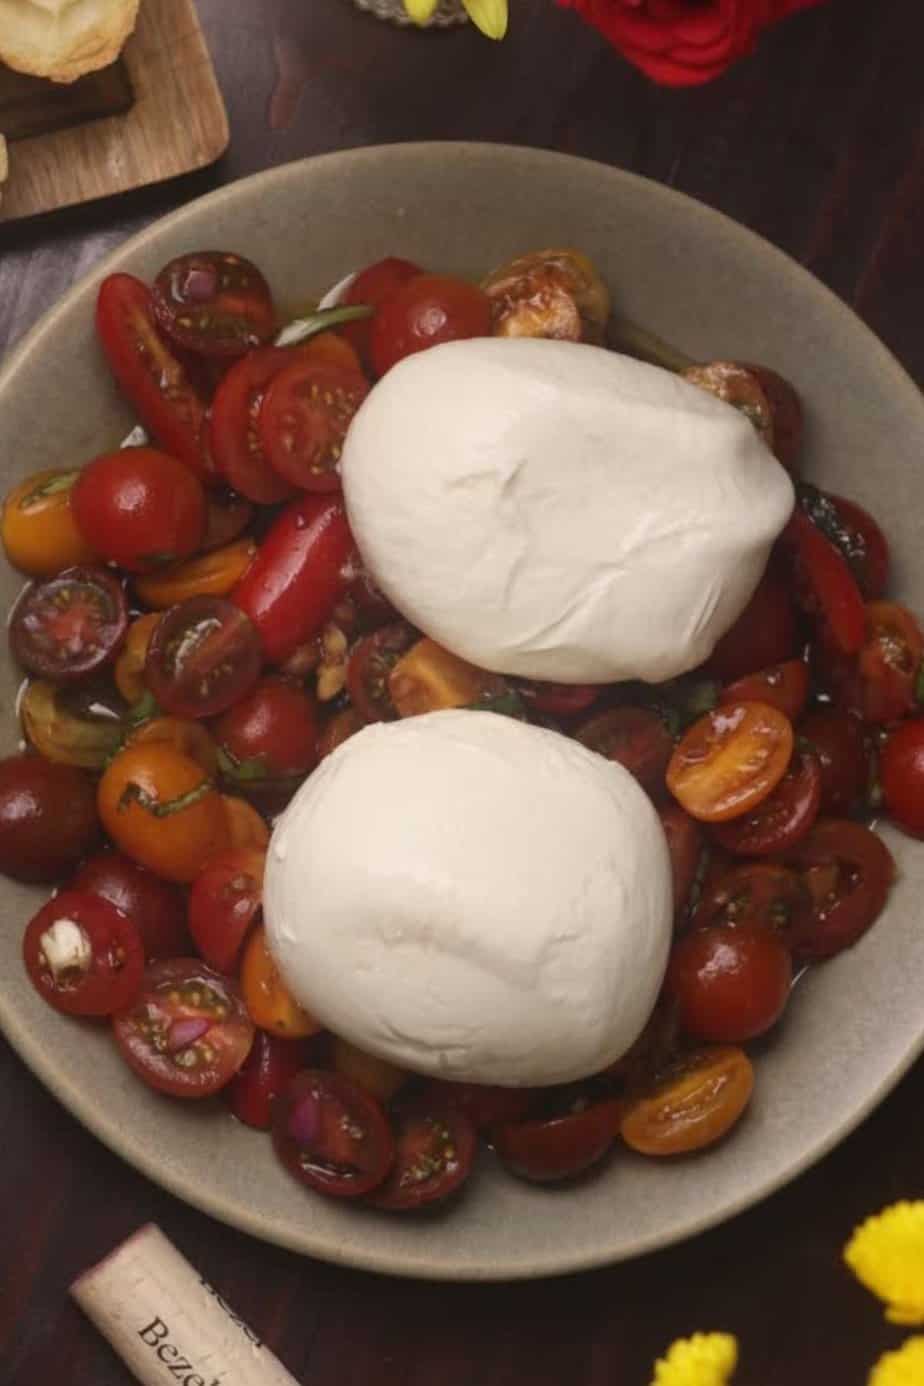 burrata caprese salad with the burrata on top of the dressed tomatoes on a green plate